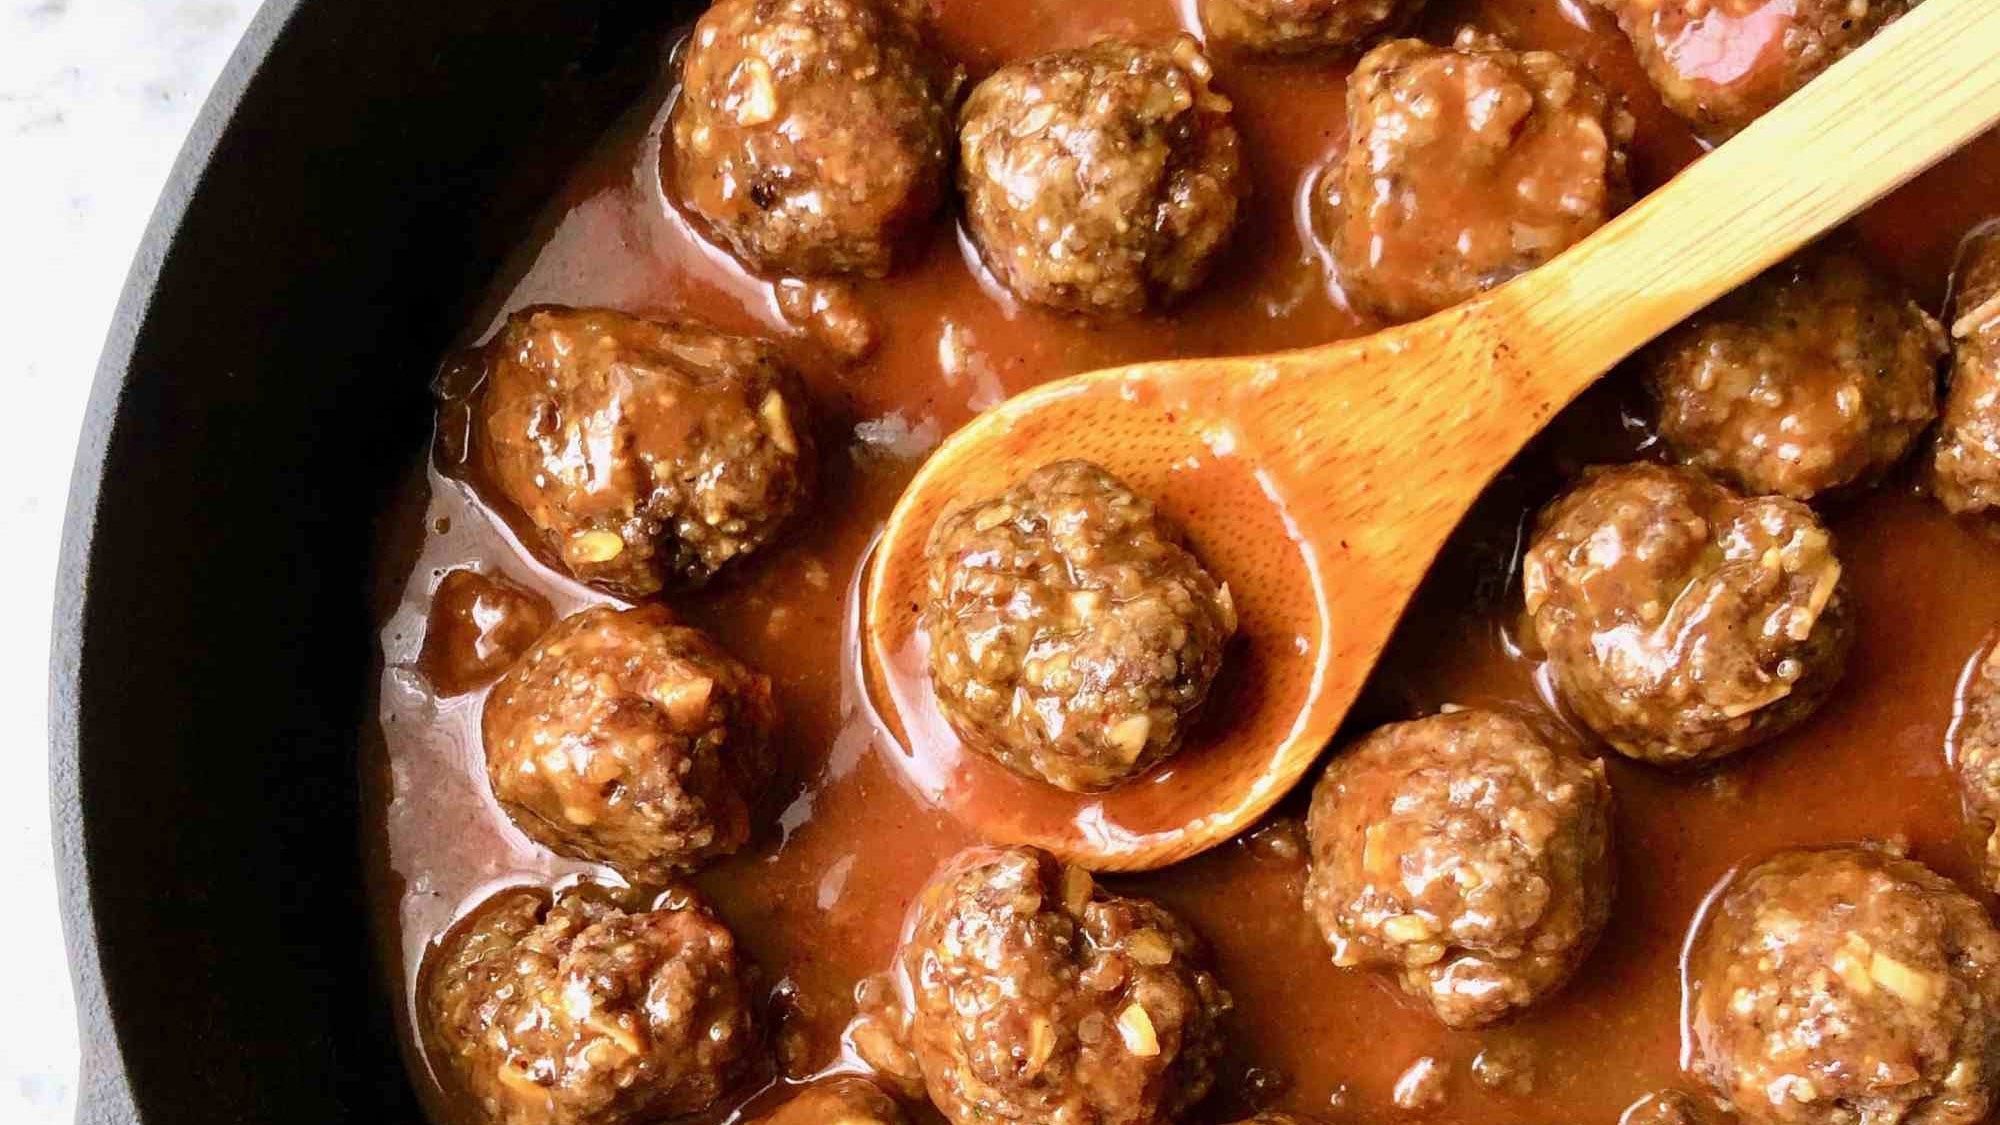 FOX NEWS: Tailgate Meatballs for NFL game day: Try the recipe